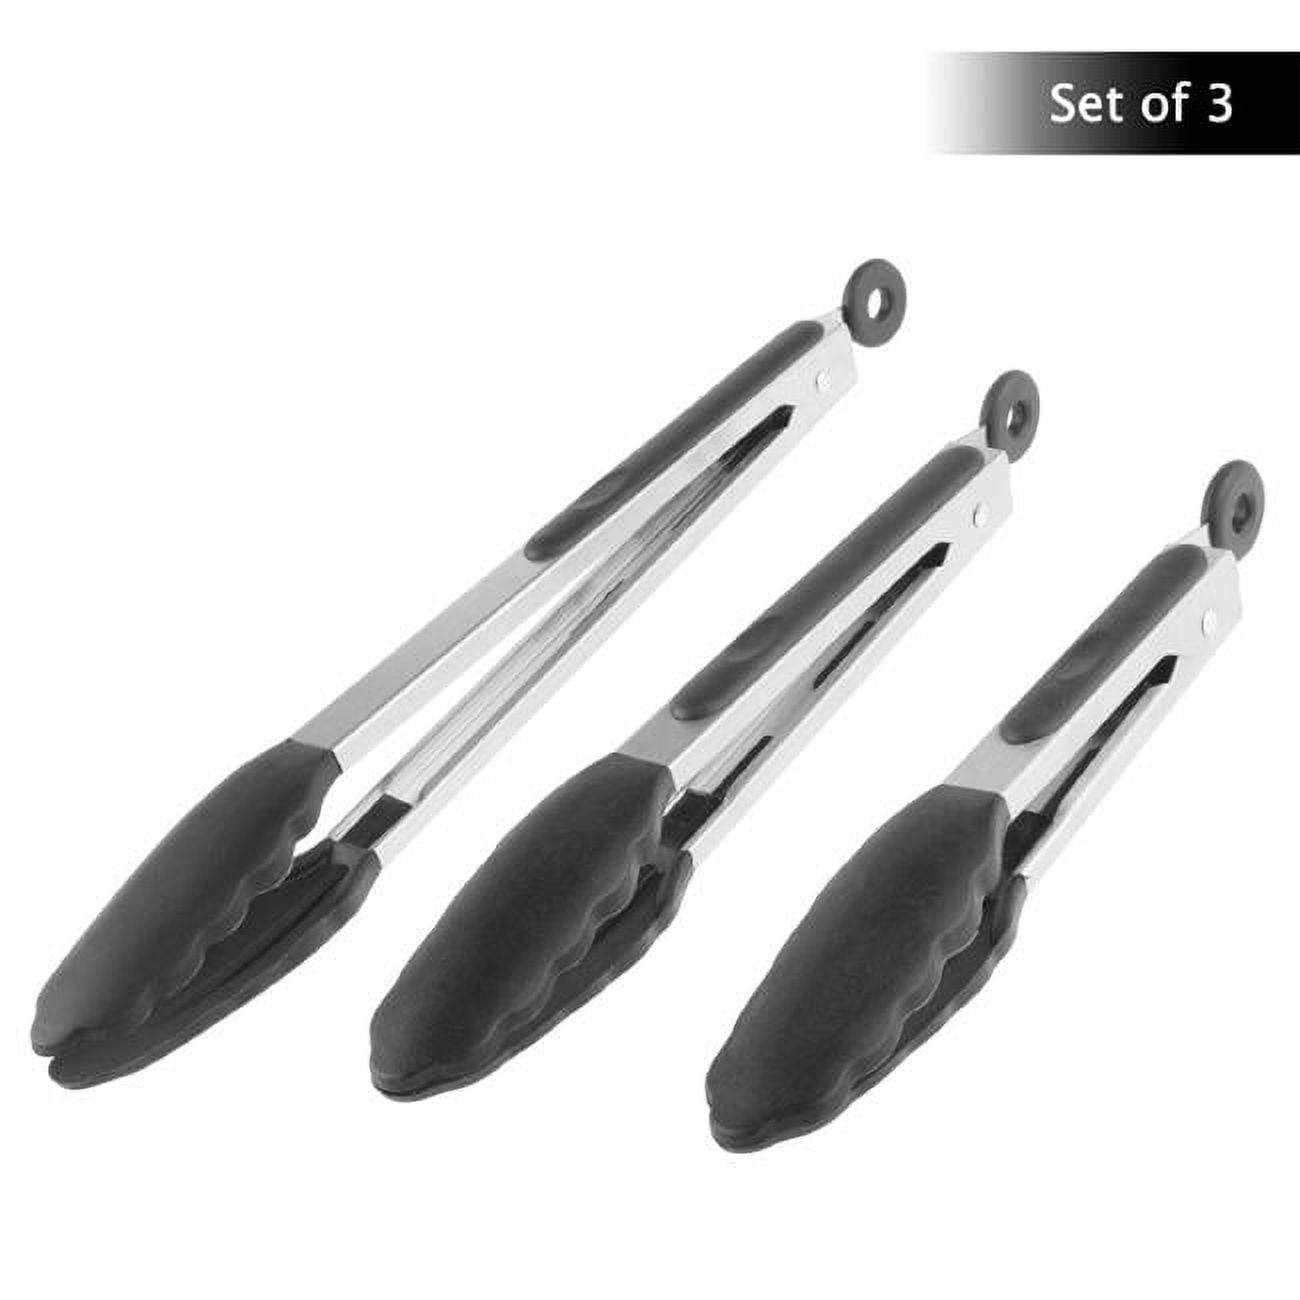 Kitchen Tongs, Stainless Steel with Non-Stick Silicone Tips, Set of 3